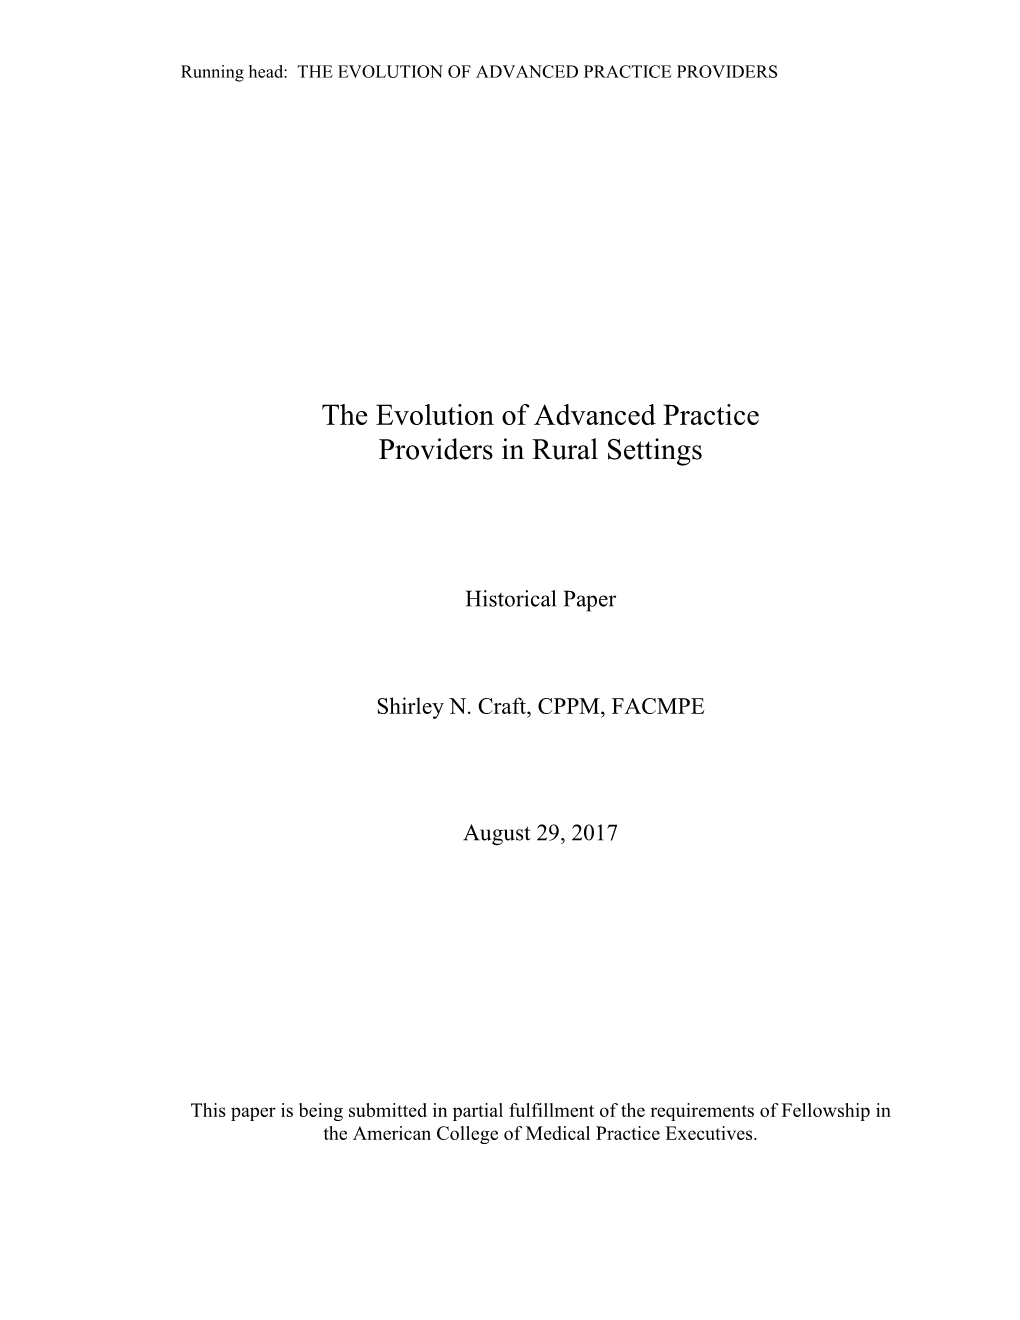 The Evolution of Advanced Practice Providers in Rural Settings